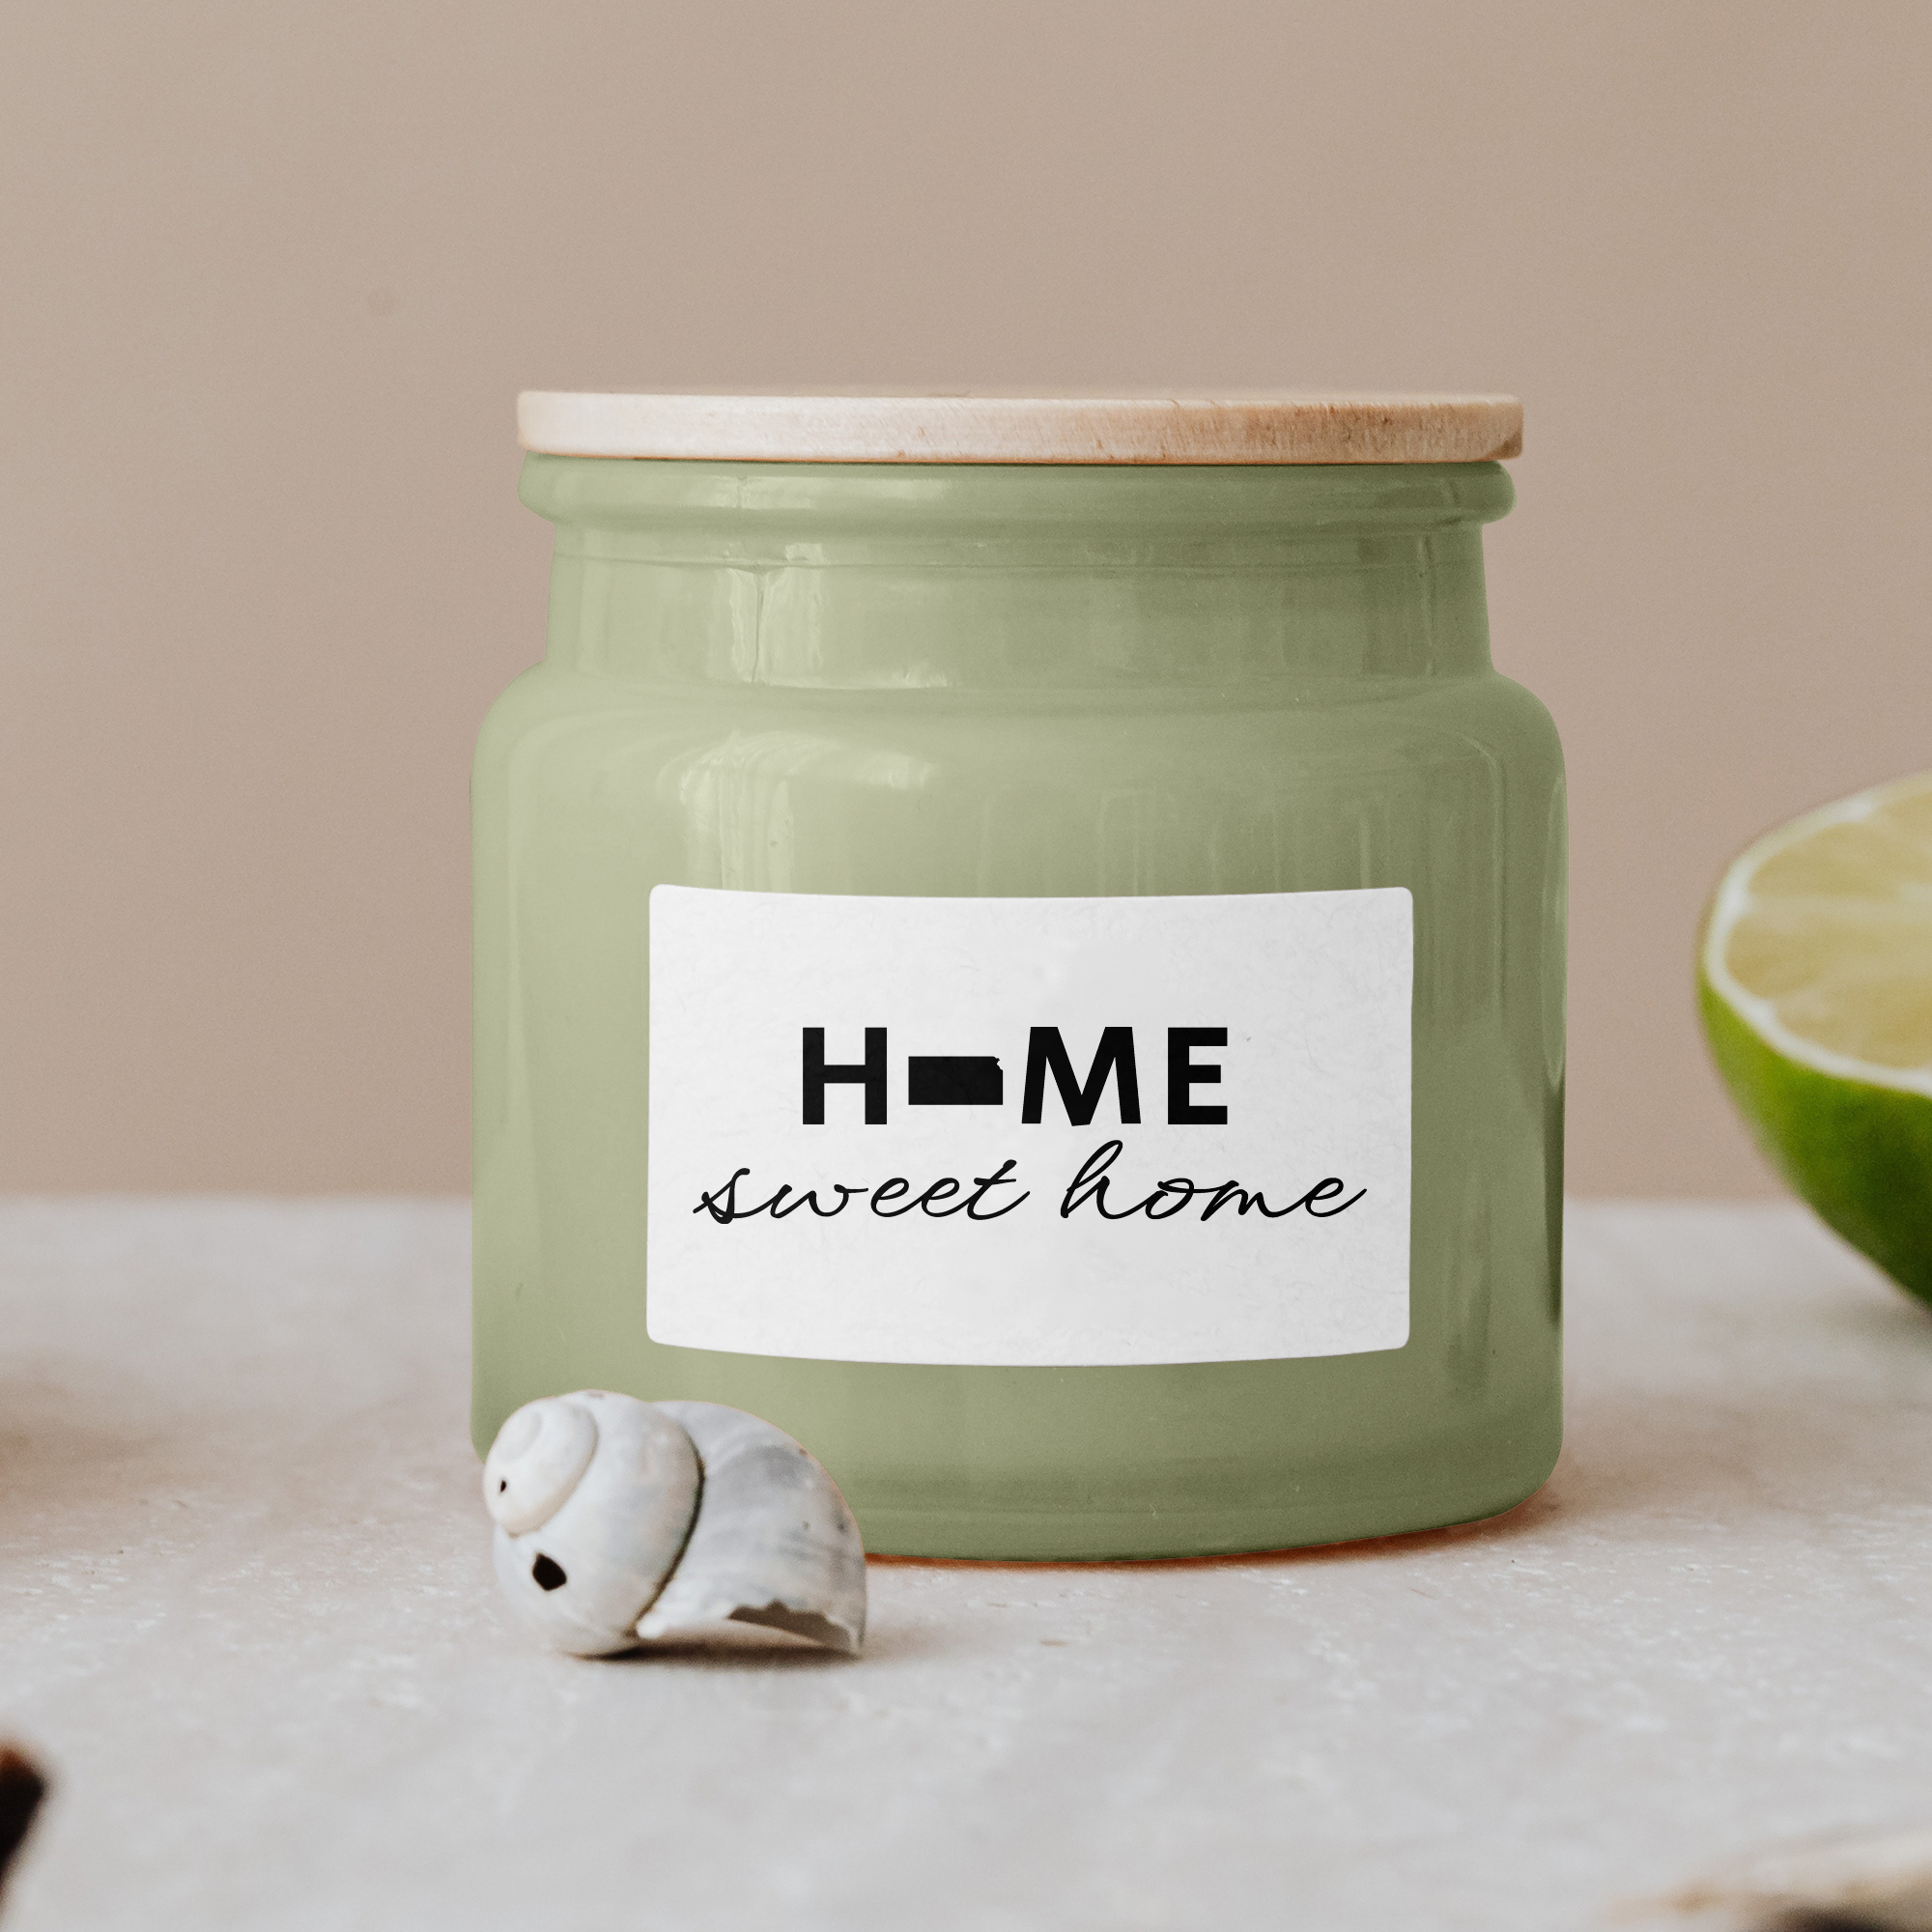 Black lettering "Home sweet home" on a white label on a green glass jar with wooden lid.